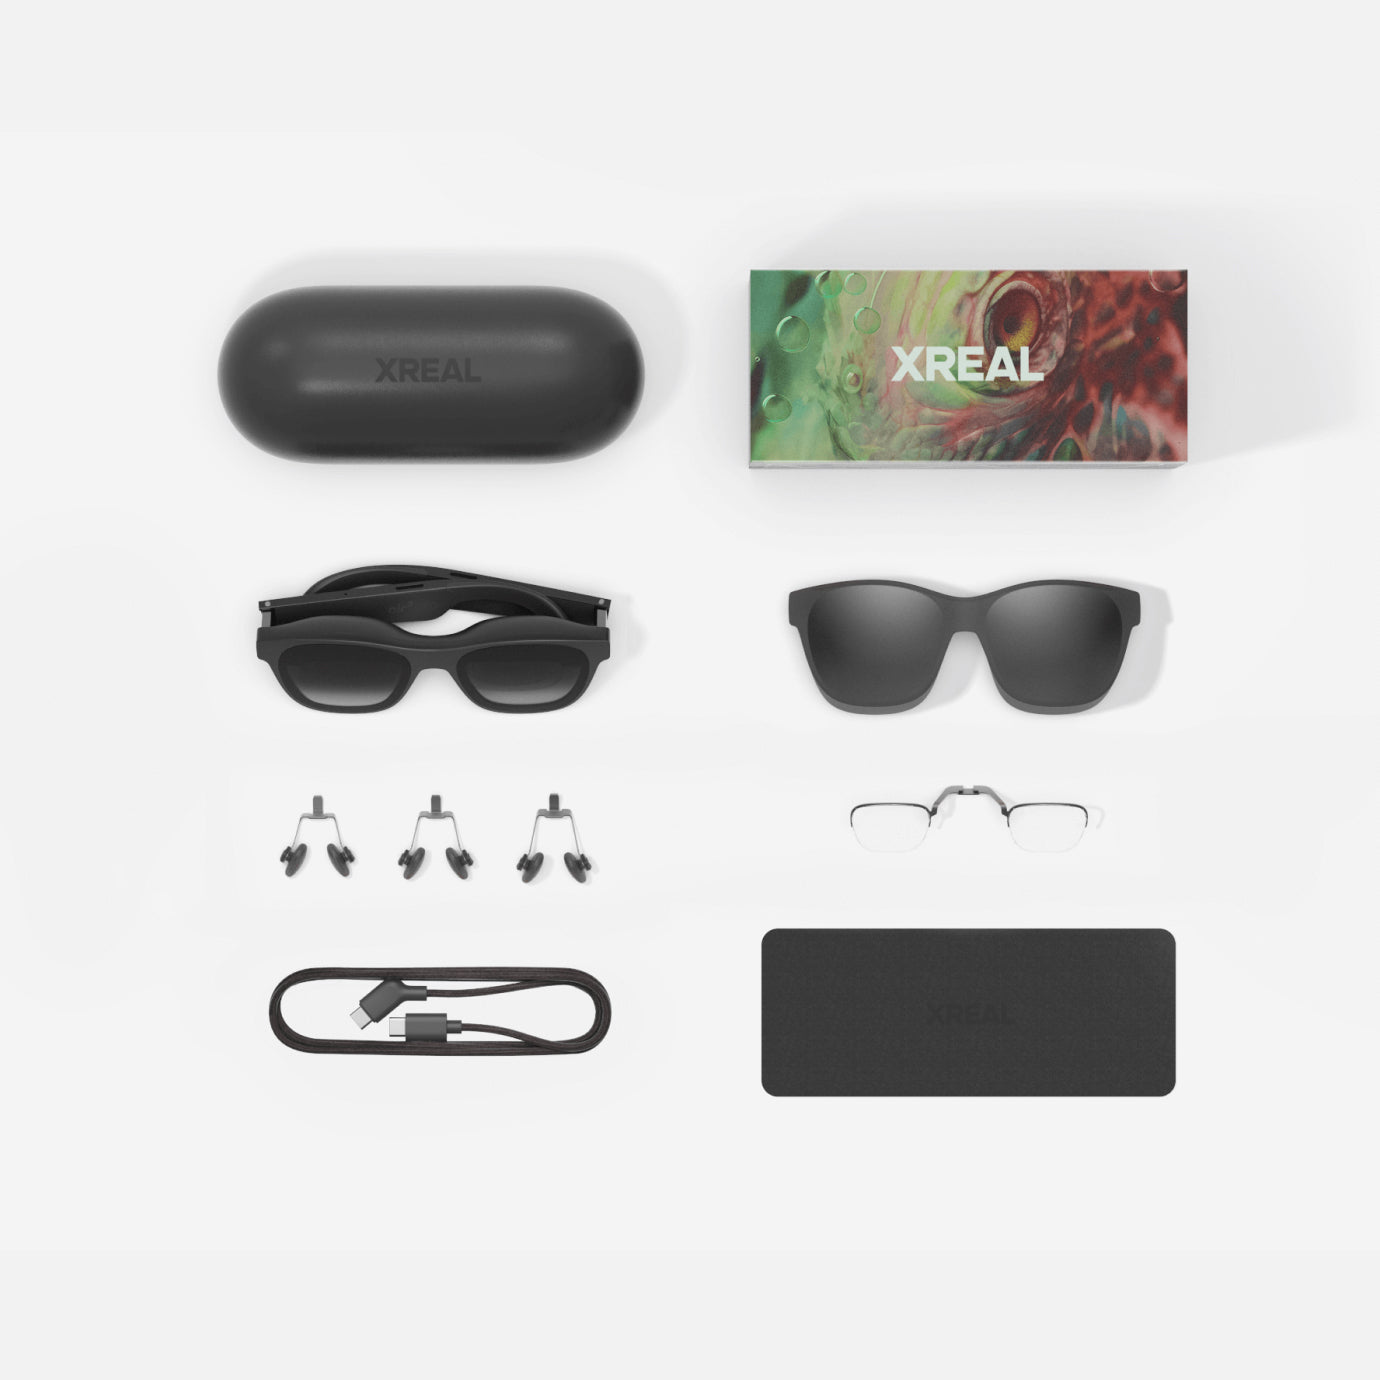 XREAL 👓 on X: Black Friday for Air 2 Pro! Treat yourself to a taste of  the future & express yourself Order XREAL Air 2 Pro glasses & get free  Kaleido Stickers